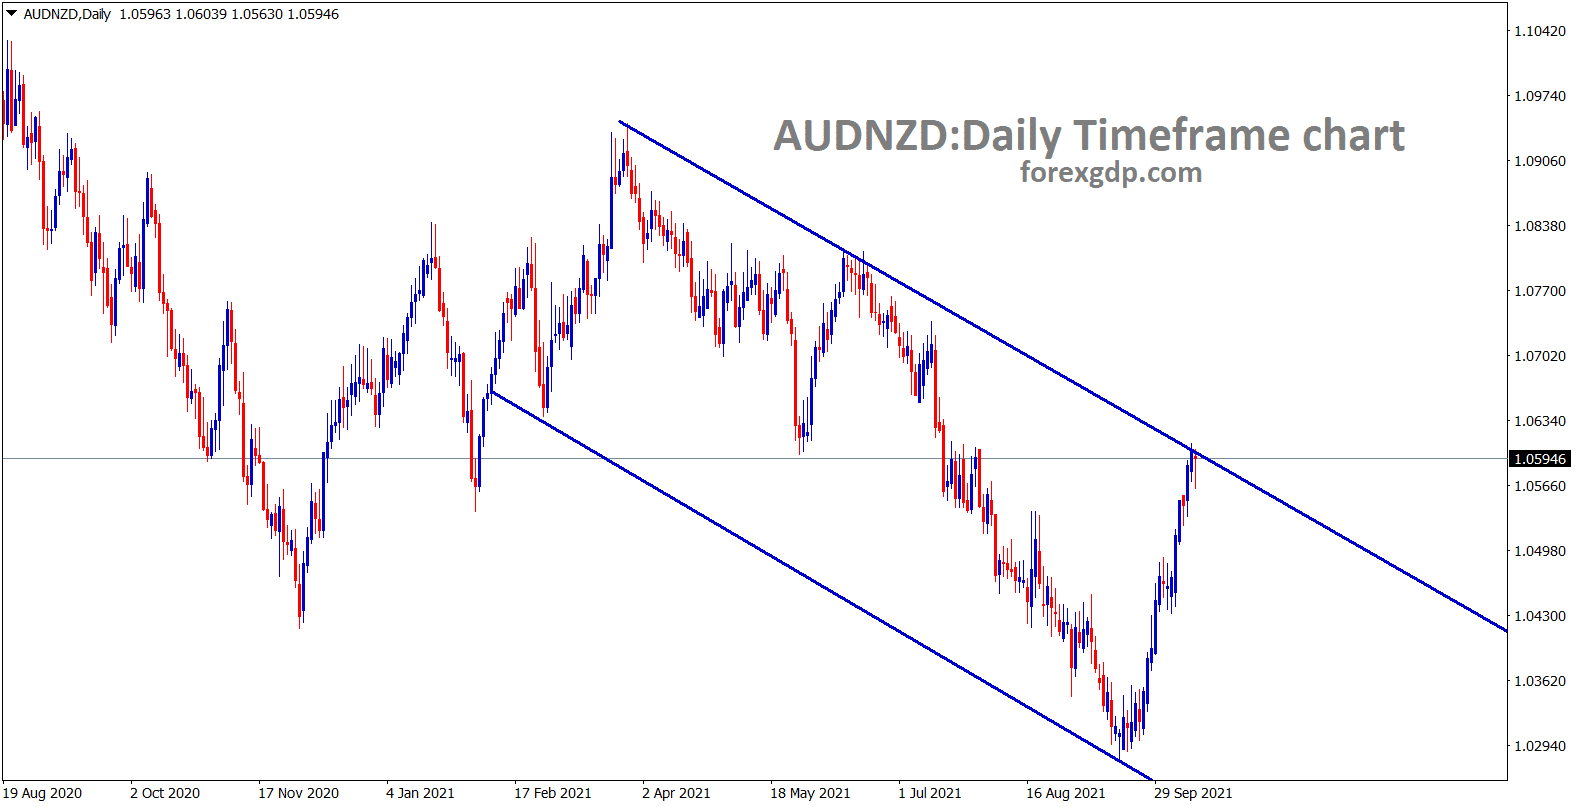 AUDNZD hits the lower high area of the descending channel line